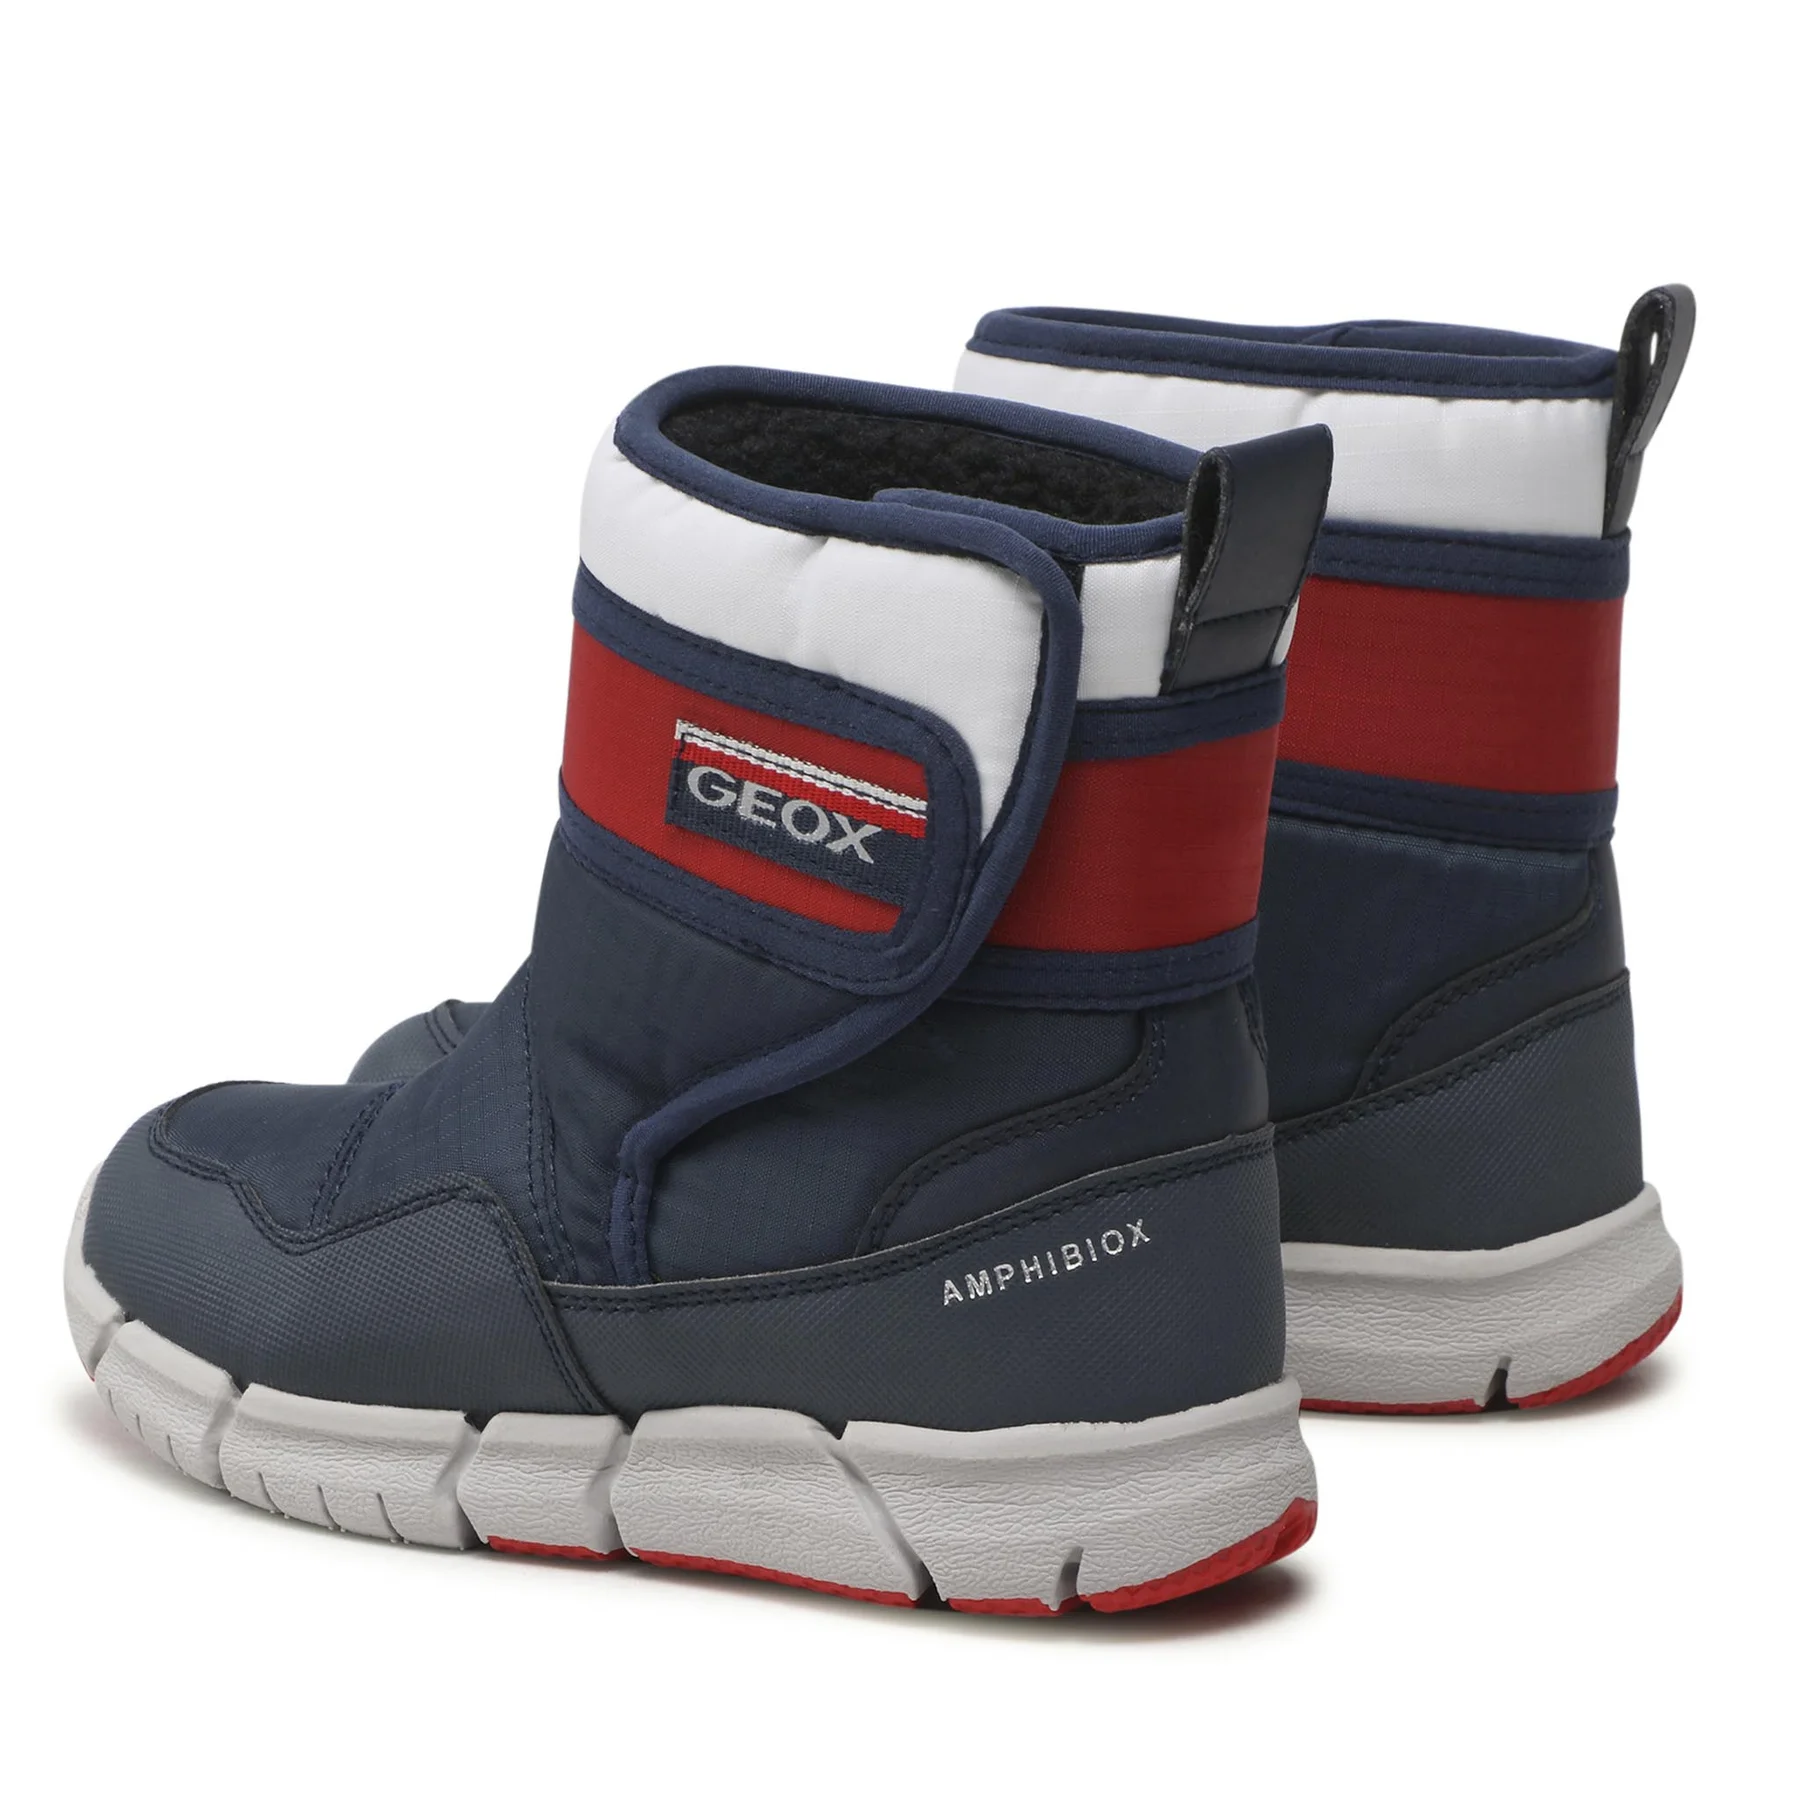 hotaposo-geox-j-flexyper-b-b-abx-f-j269xf-0fu50-c0735-s-navy-red (2)